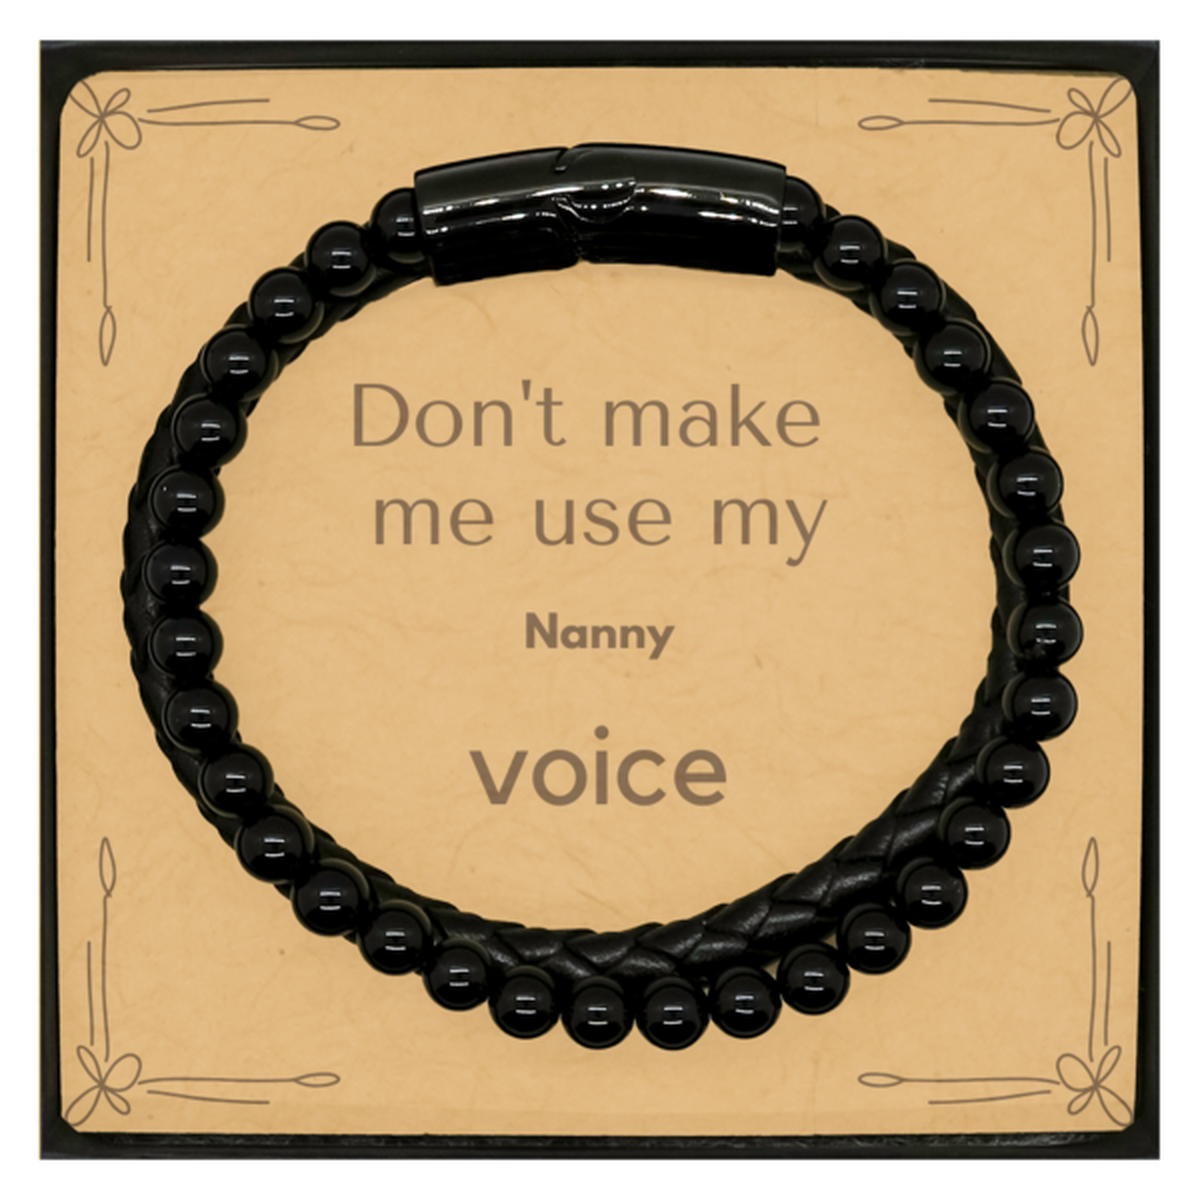 Don't make me use my Nanny voice, Sarcasm Nanny Card Gifts, Christmas Nanny Stone Leather Bracelets Birthday Unique Gifts For Nanny Coworkers, Men, Women, Colleague, Friends